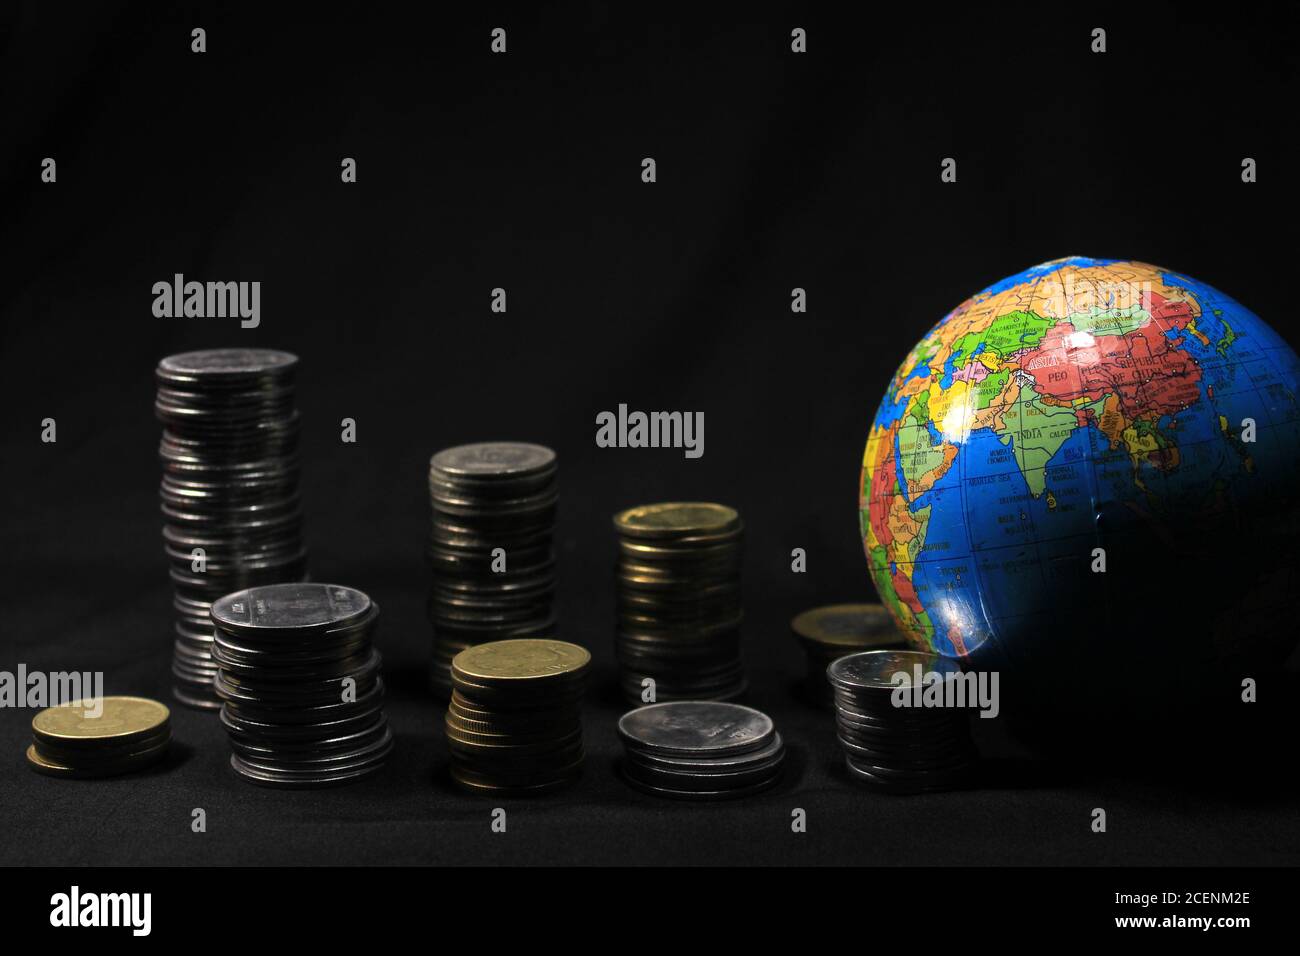 Stock pile of 1, 2, 5, 10 Indian rupee metal coin currency with globe isolated on black background. Financial, economy, investment concept. Stock Photo